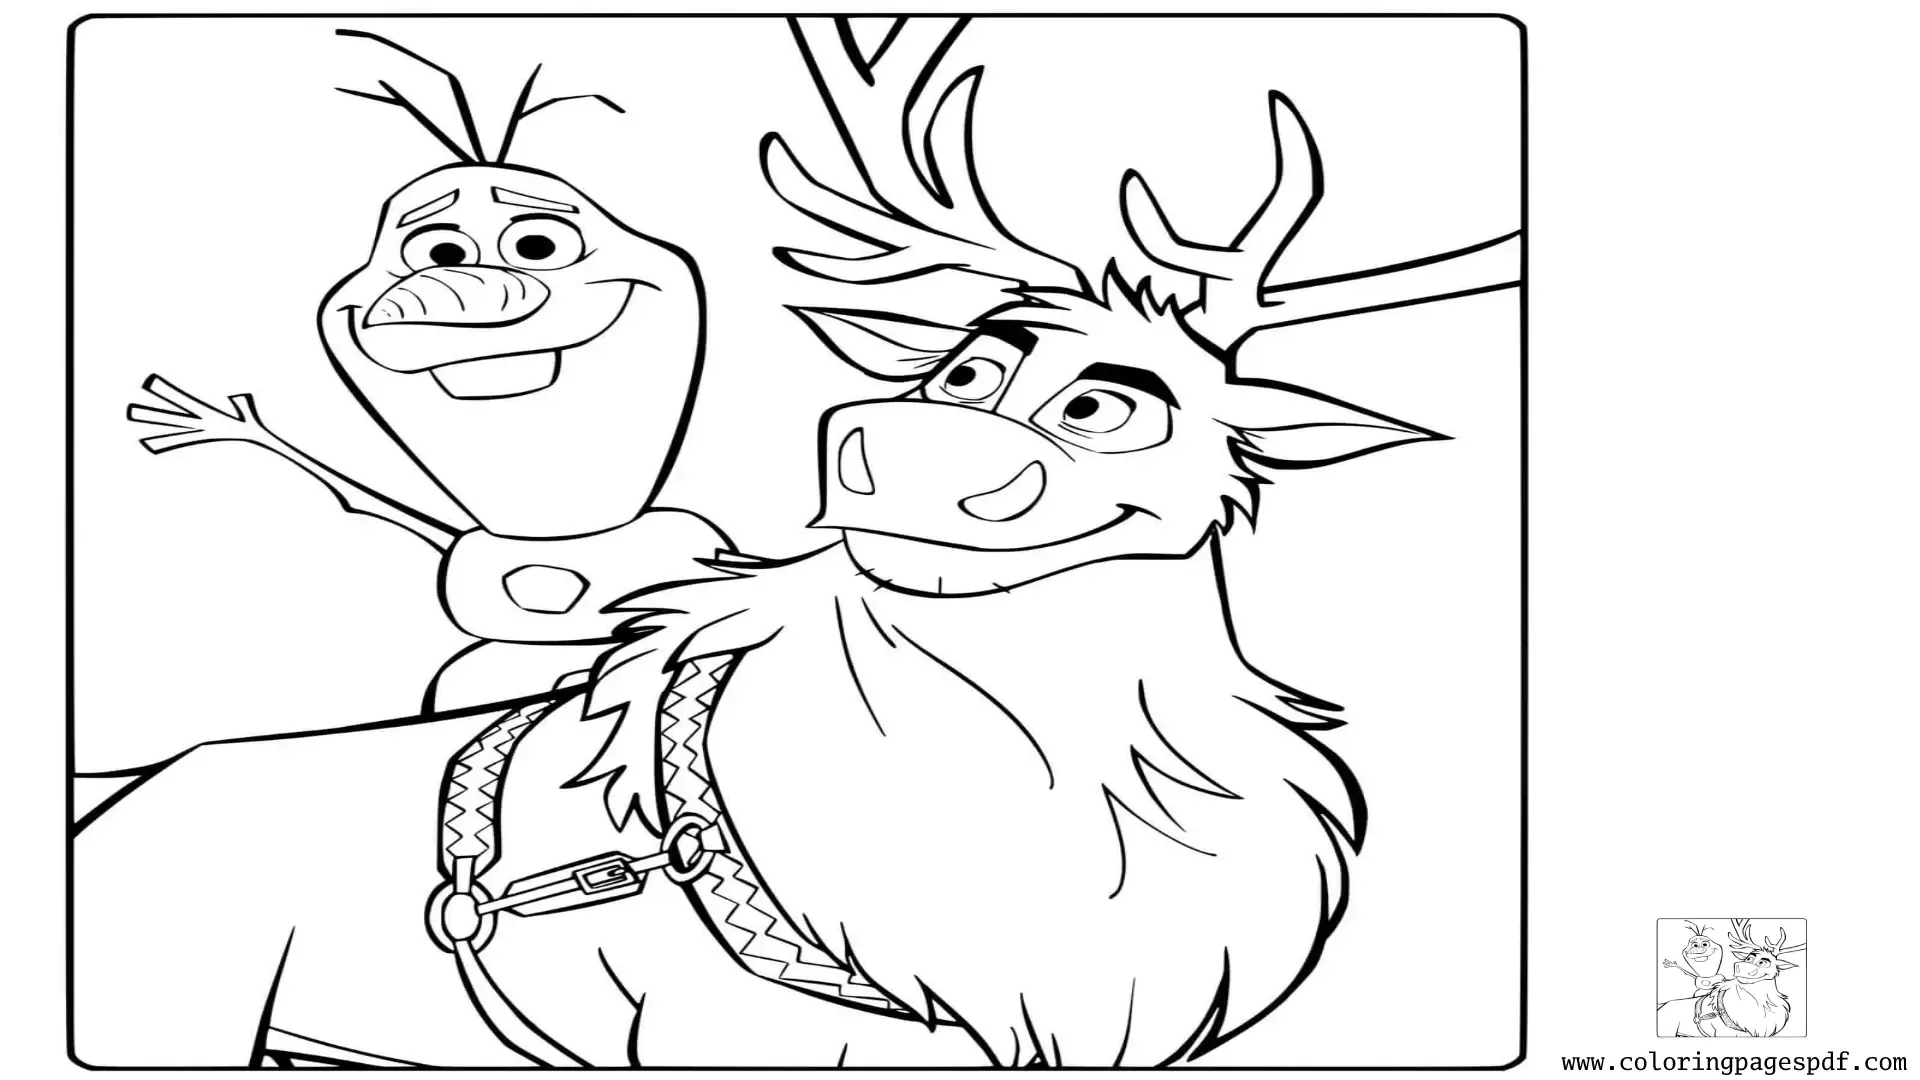 Coloring Page Of Olaf And Sven